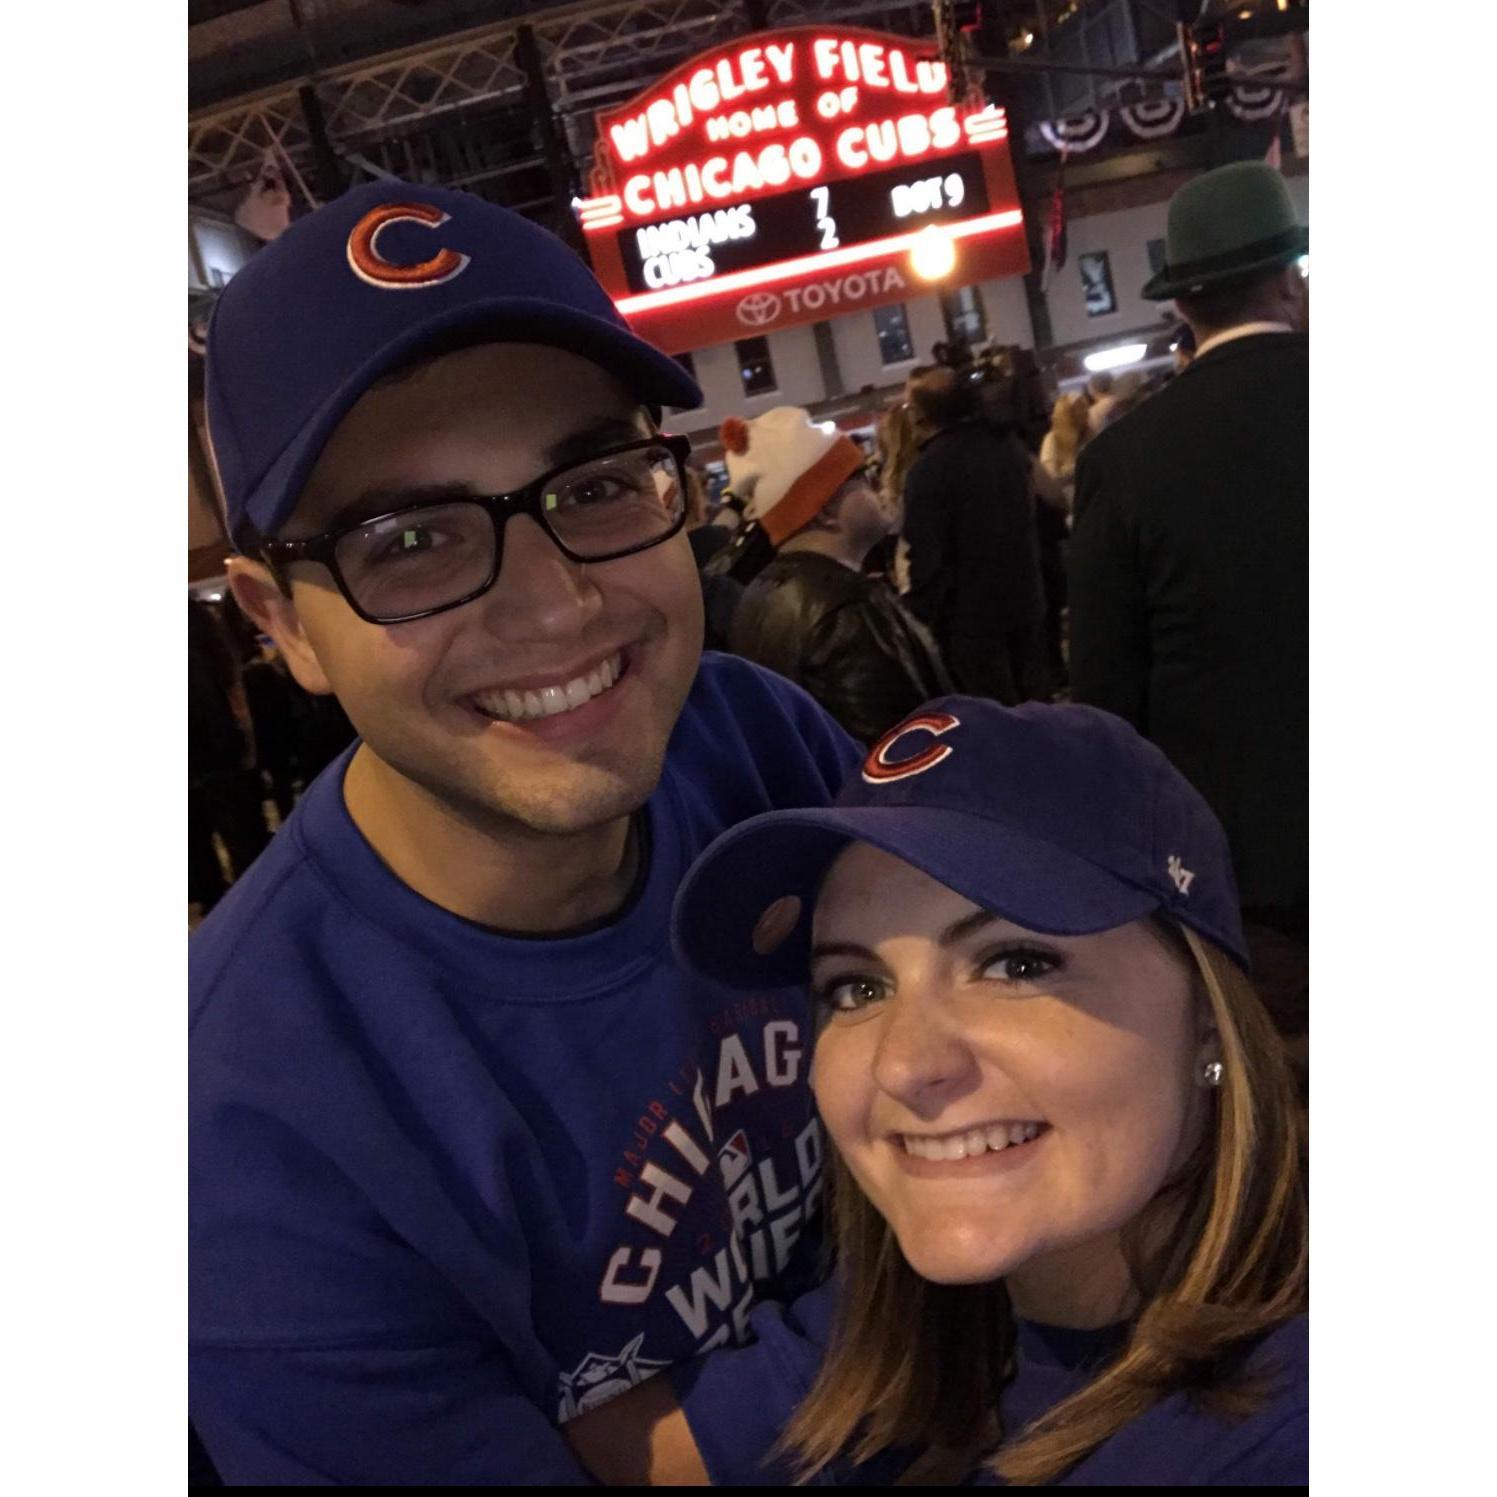 Chicago Cubs World Series, 2016